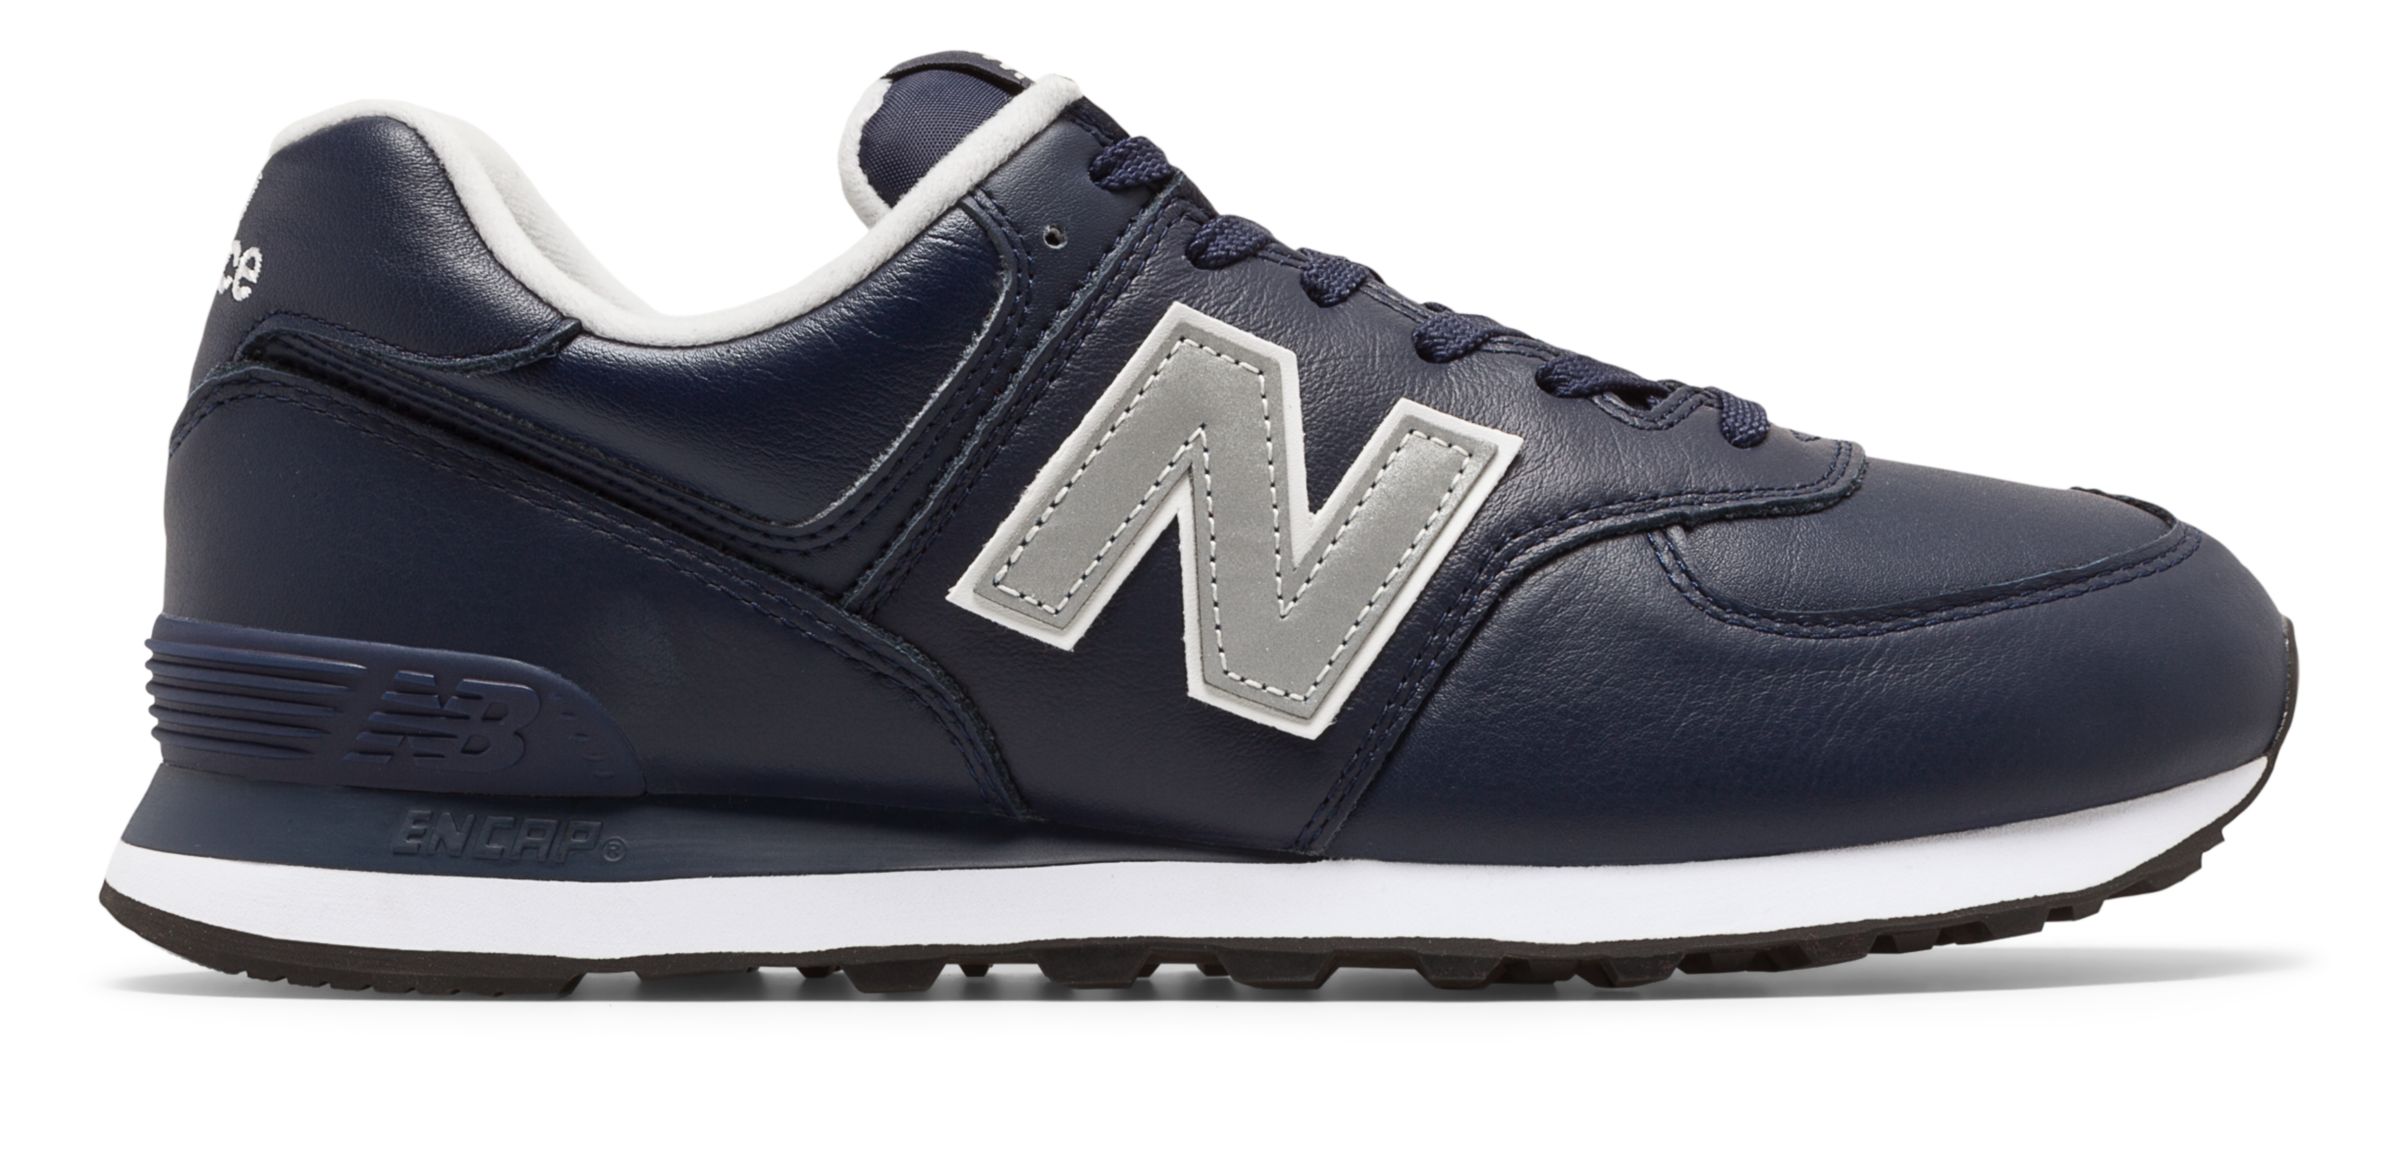 Men's New Balance 574 Shoes - New Colors and Styles